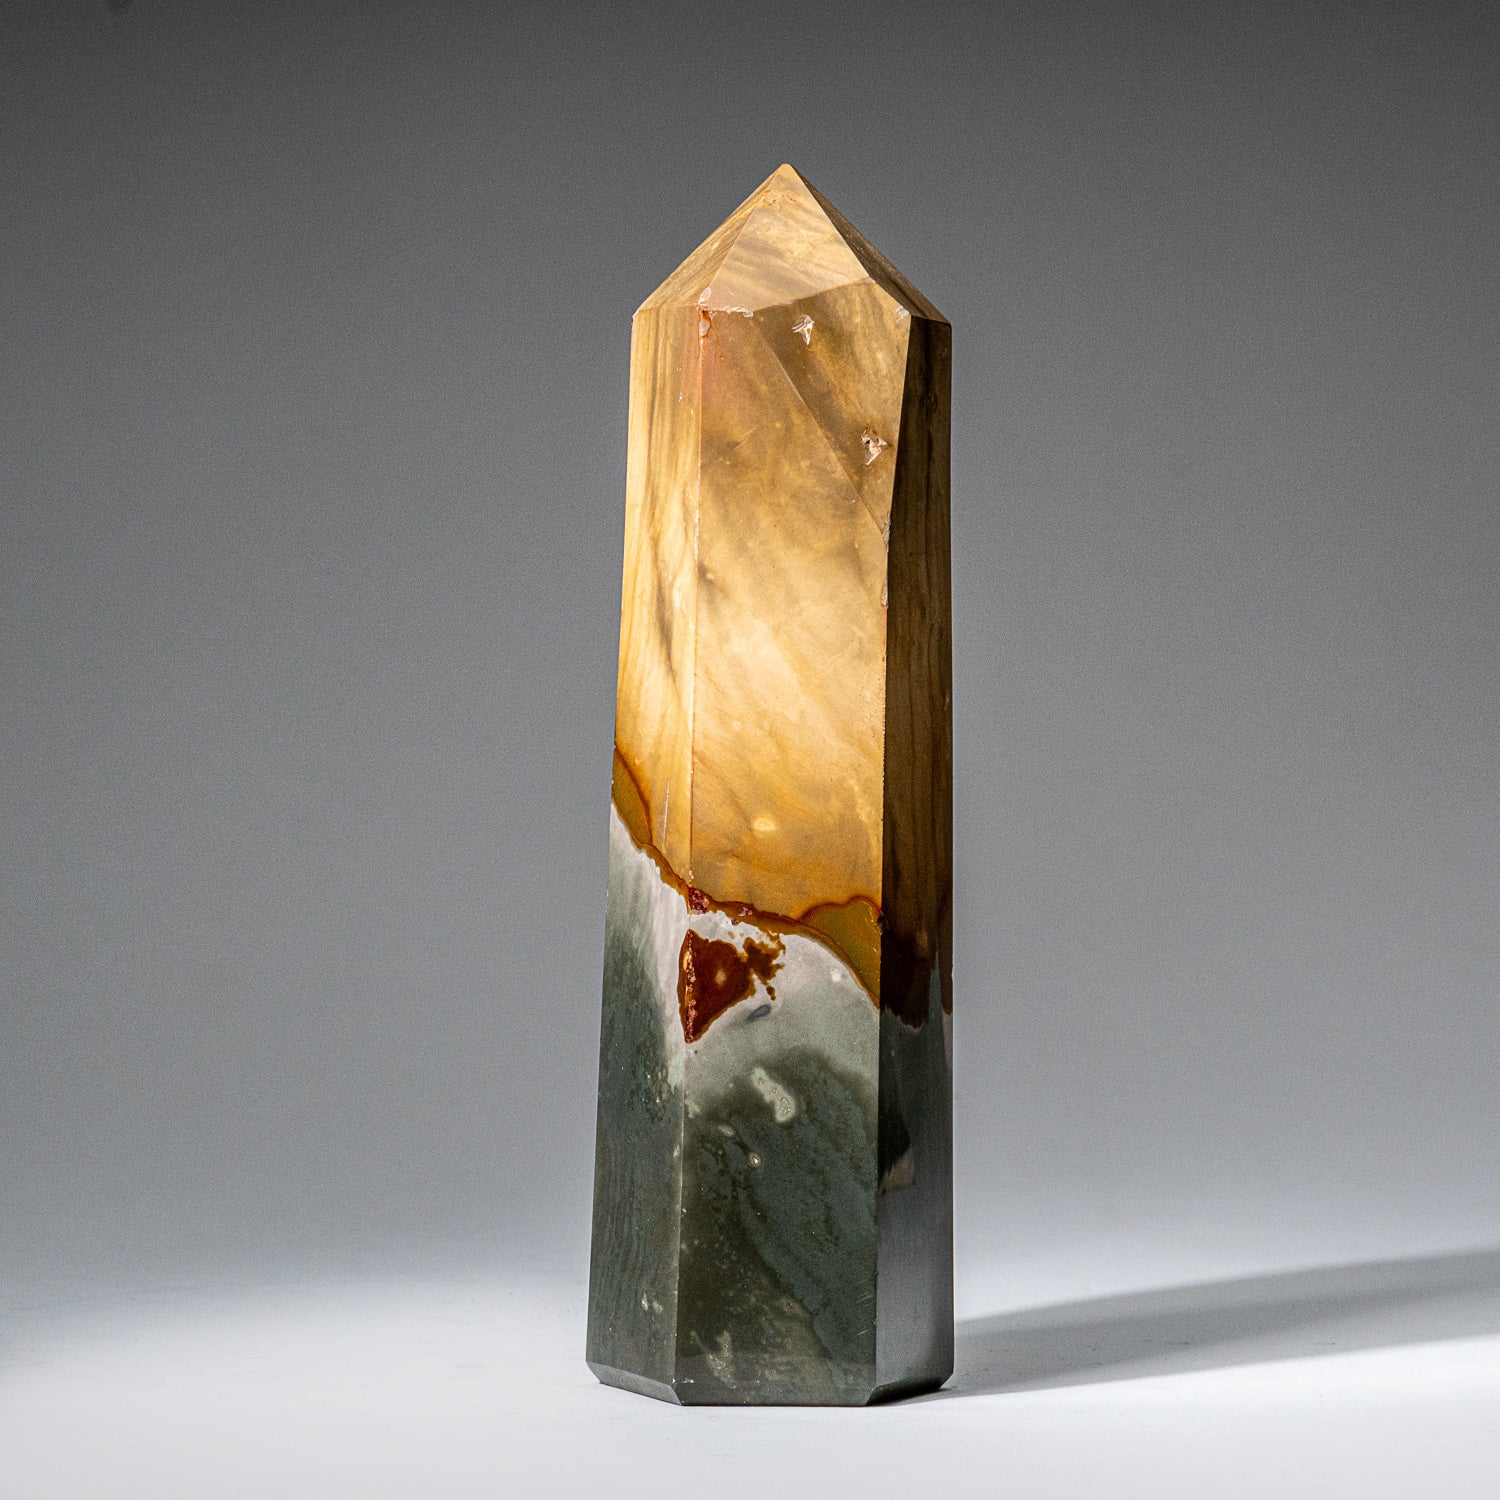 Polished Polychrome Point from Madagascar (2.1 lbs)